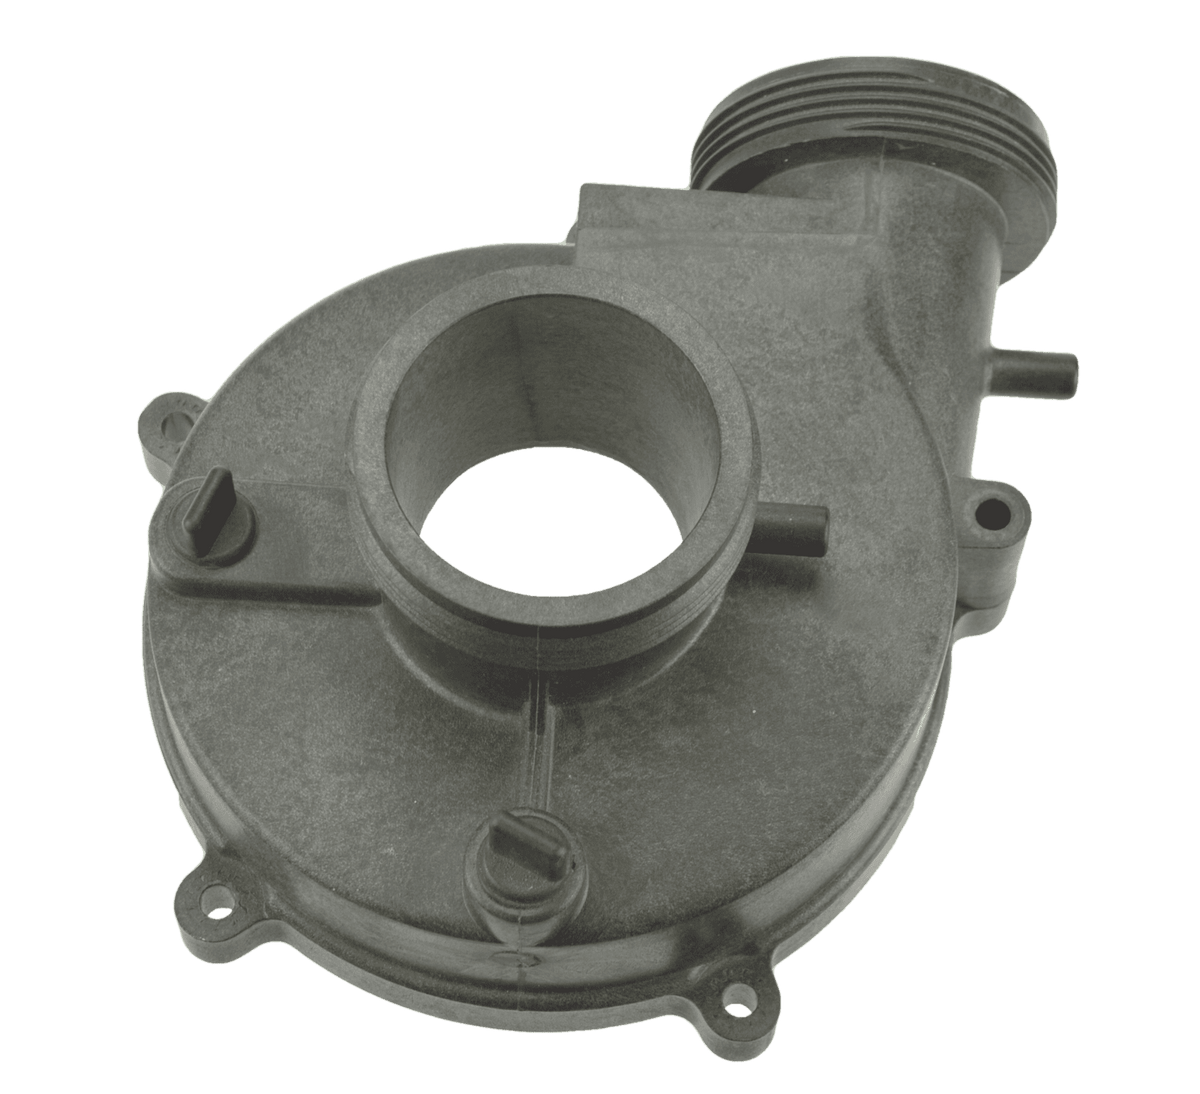 Balboa Vico Ultimax Pump Front Body - Superior Performance for Your Pool